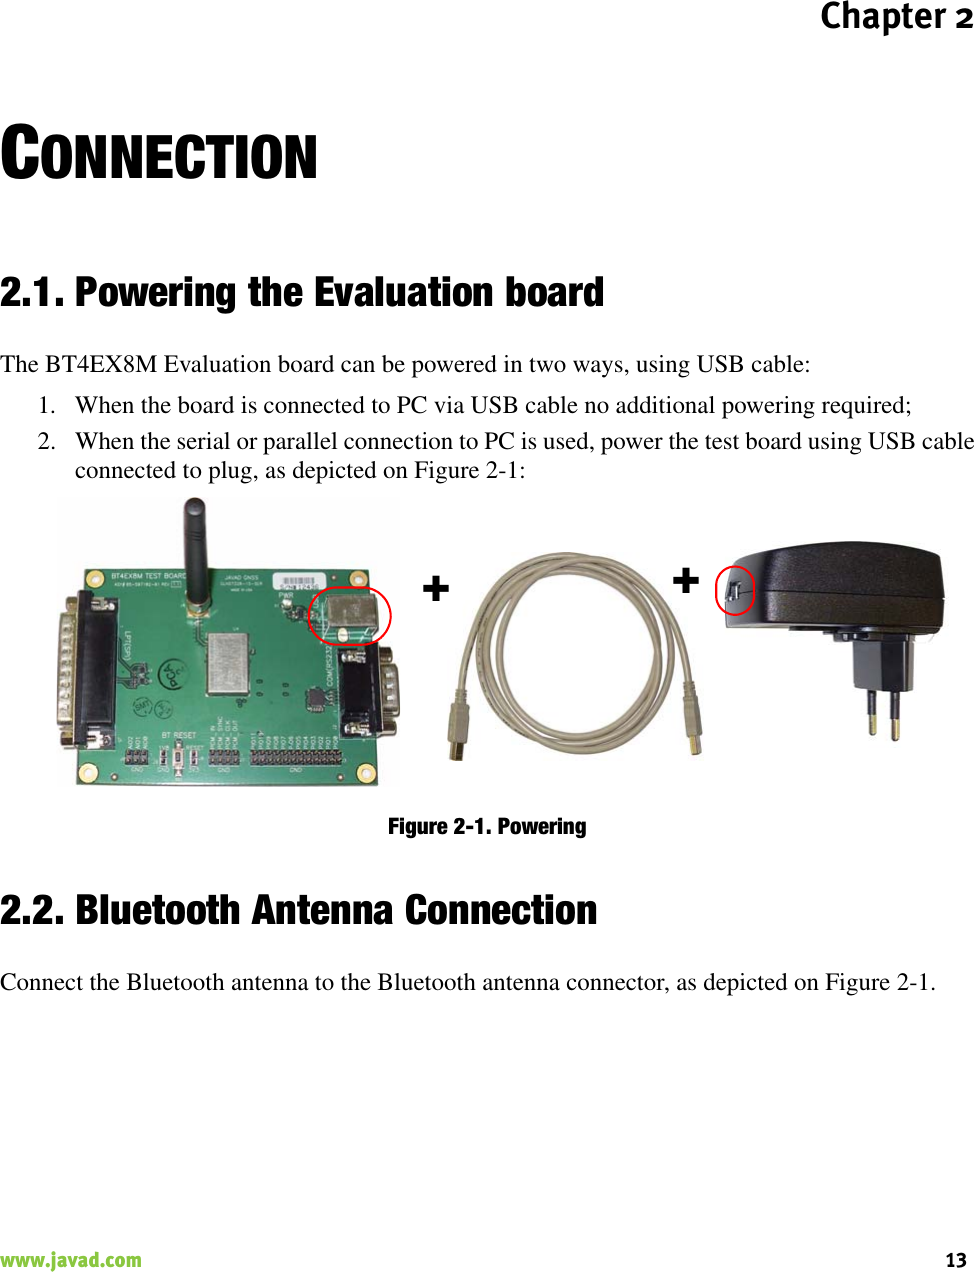 Chapter 213www.javad.com                                                                                                                                                    CONNECTION2.1. Powering the Evaluation boardThe BT4EX8M Evaluation board can be powered in two ways, using USB cable:1. When the board is connected to PC via USB cable no additional powering required;2. When the serial or parallel connection to PC is used, power the test board using USB cableconnected to plug, as depicted on Figure 2-1:Figure 2-1. Powering 2.2. Bluetooth Antenna ConnectionConnect the Bluetooth antenna to the Bluetooth antenna connector, as depicted on Figure 2-1.++